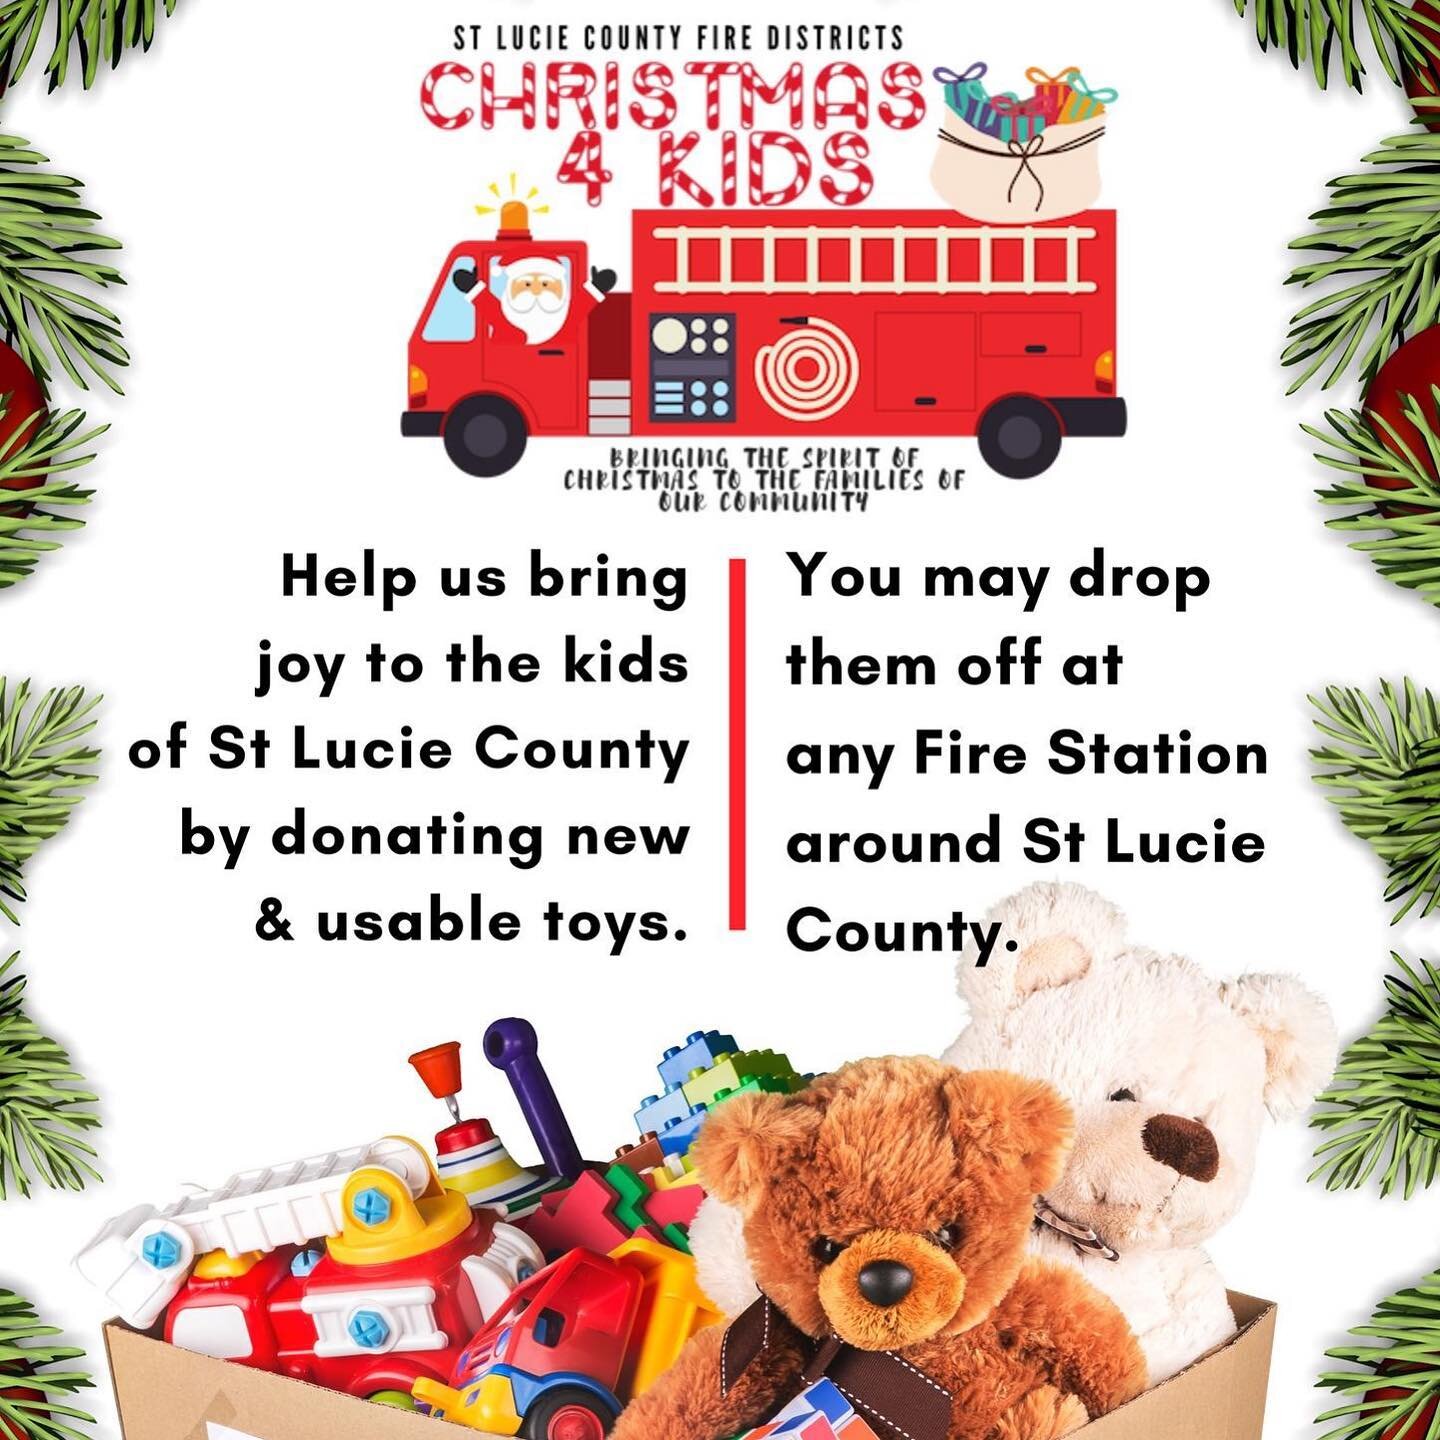 🚒We have a shortage of toys for 0-3 years of age for both boys and girls! We are still collecting toys all this week.
🎁All toys collected stay right here in St Lucie County to help our St Lucie County community. 
COUNTDOWN UNTIL CHRISTMAS IS ON and